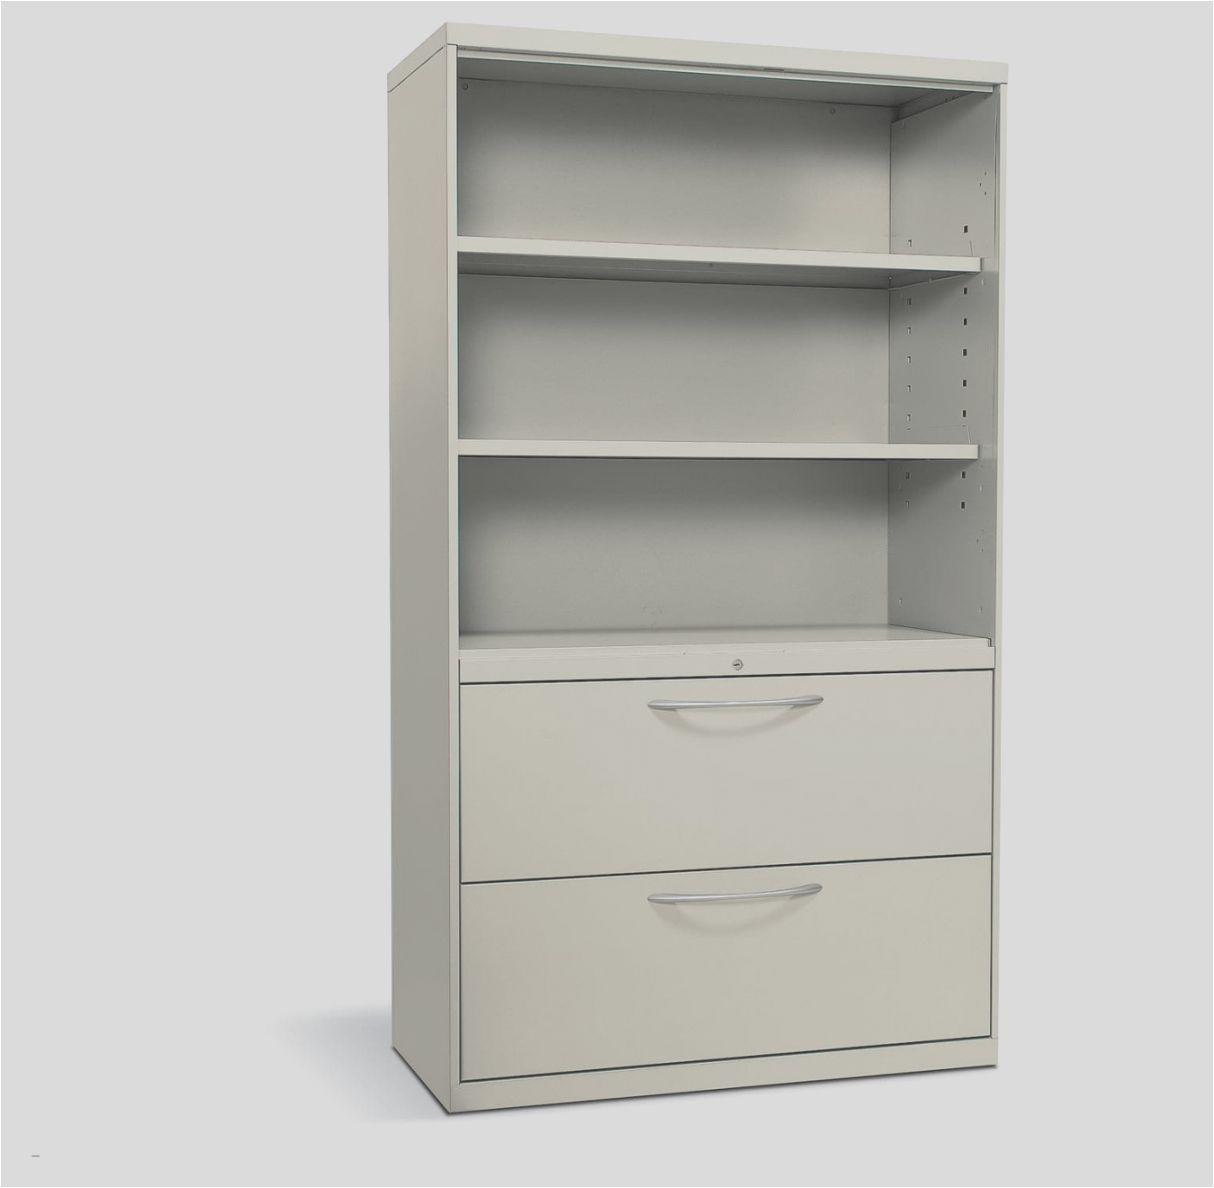 50 Good Steel File Cabinet Sense Steel File Cabinet Lateral File intended for dimensions 1214 X 1188